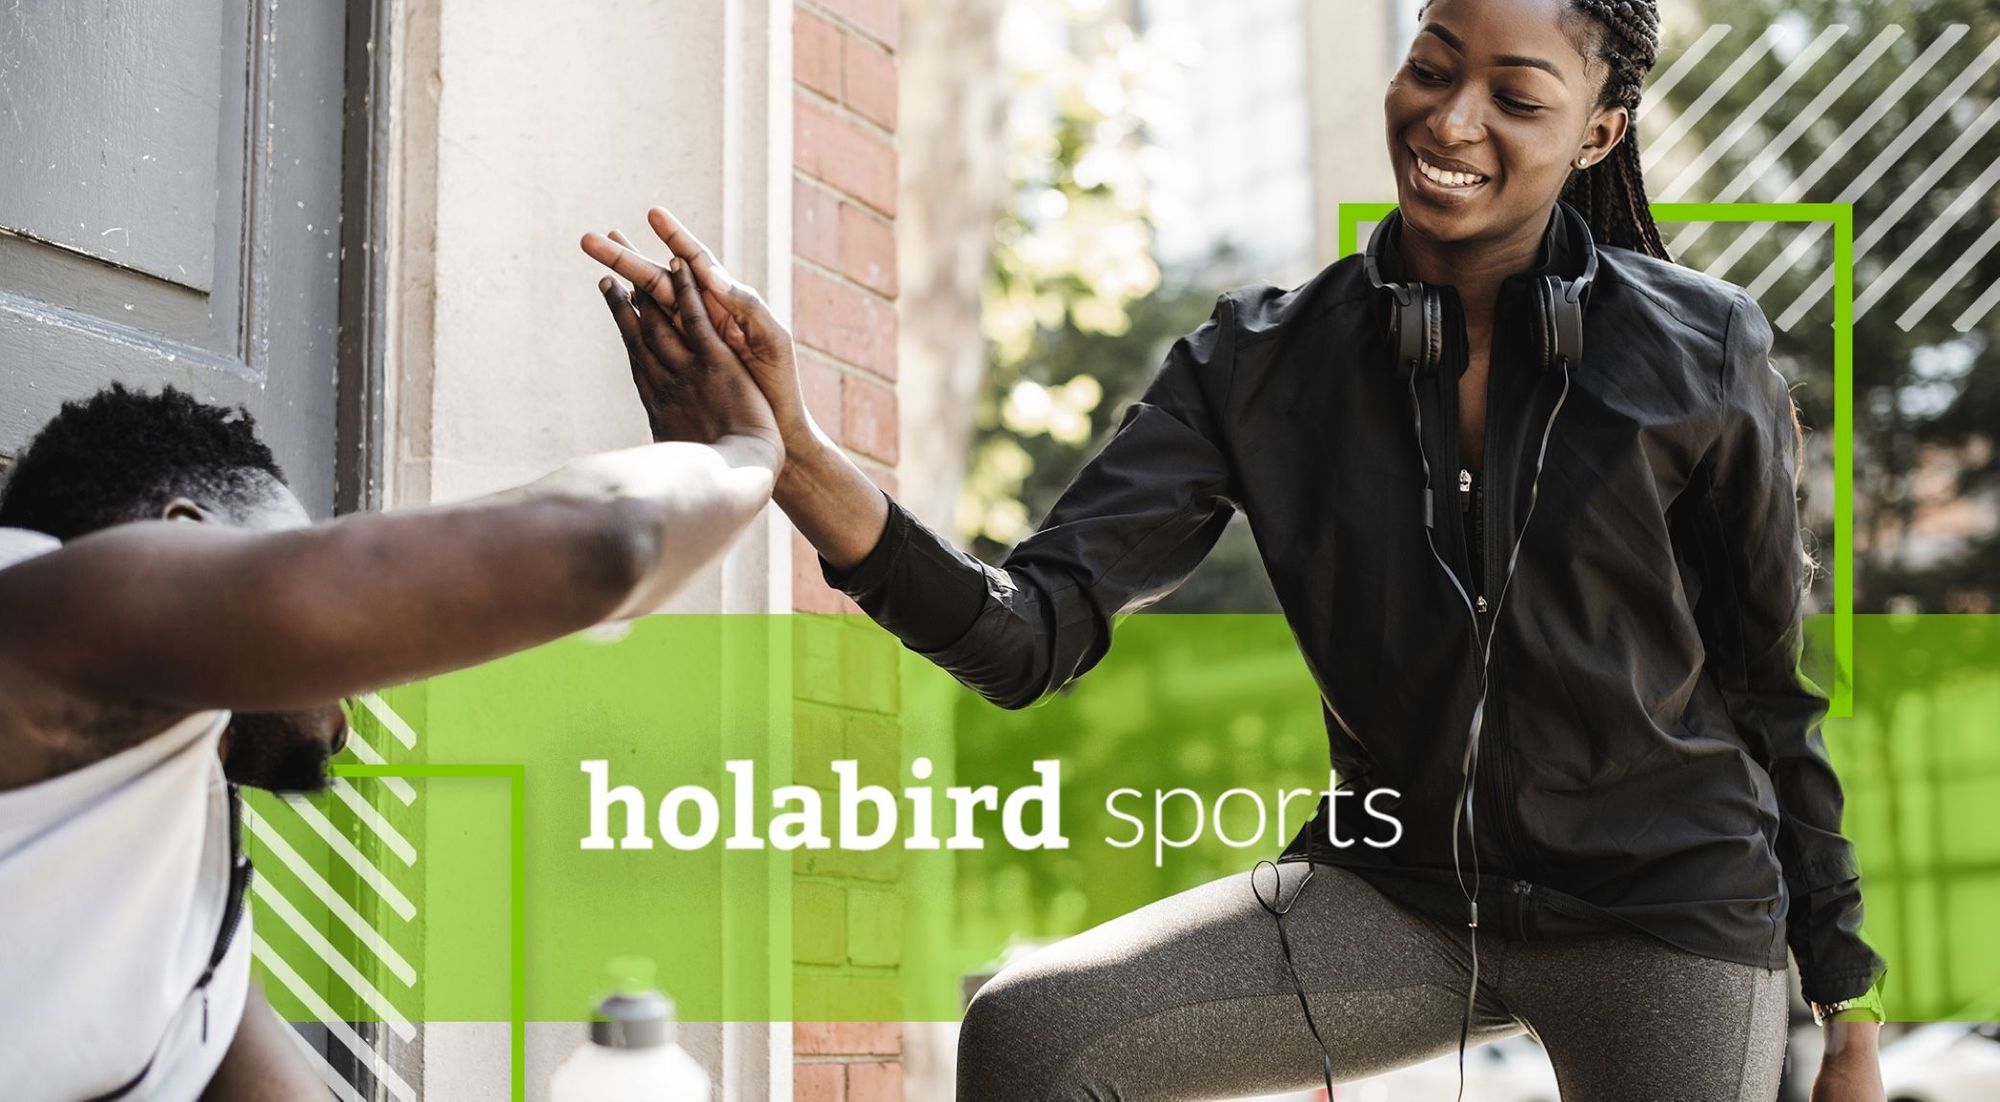 Holabird Sports achieved game-changing results by testing TrustedSite